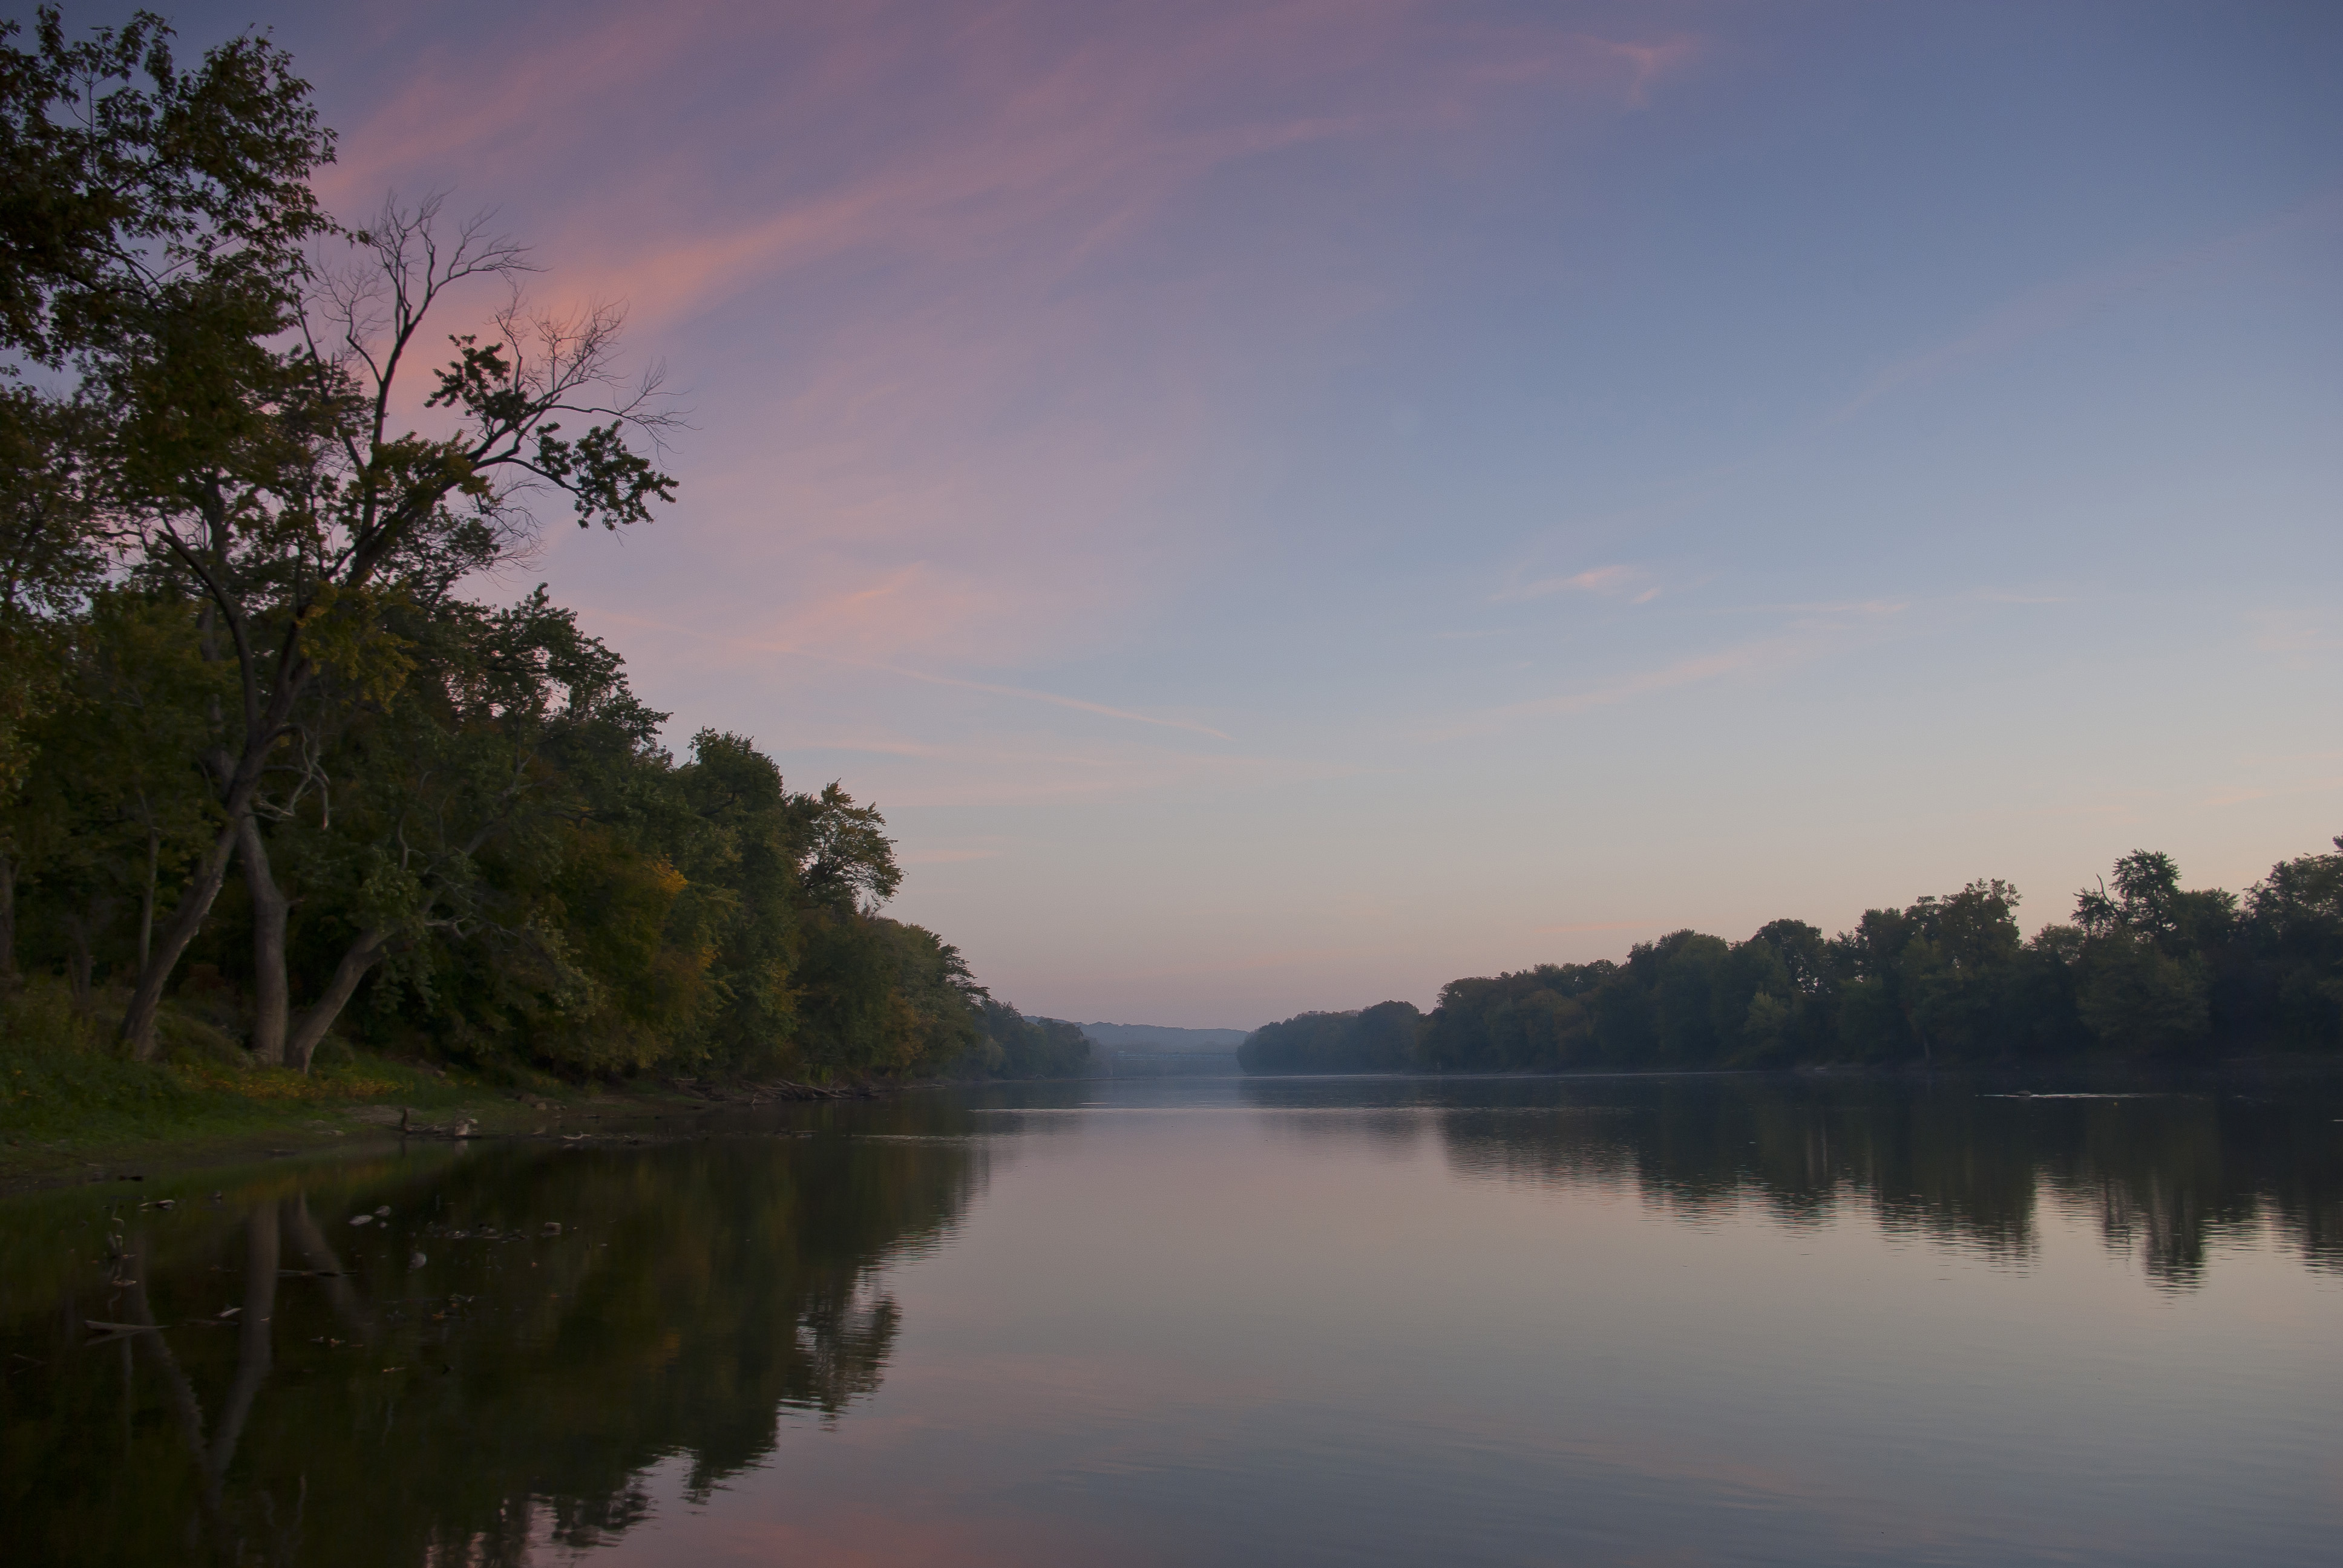 A view of the flat Wabash River during sunset.